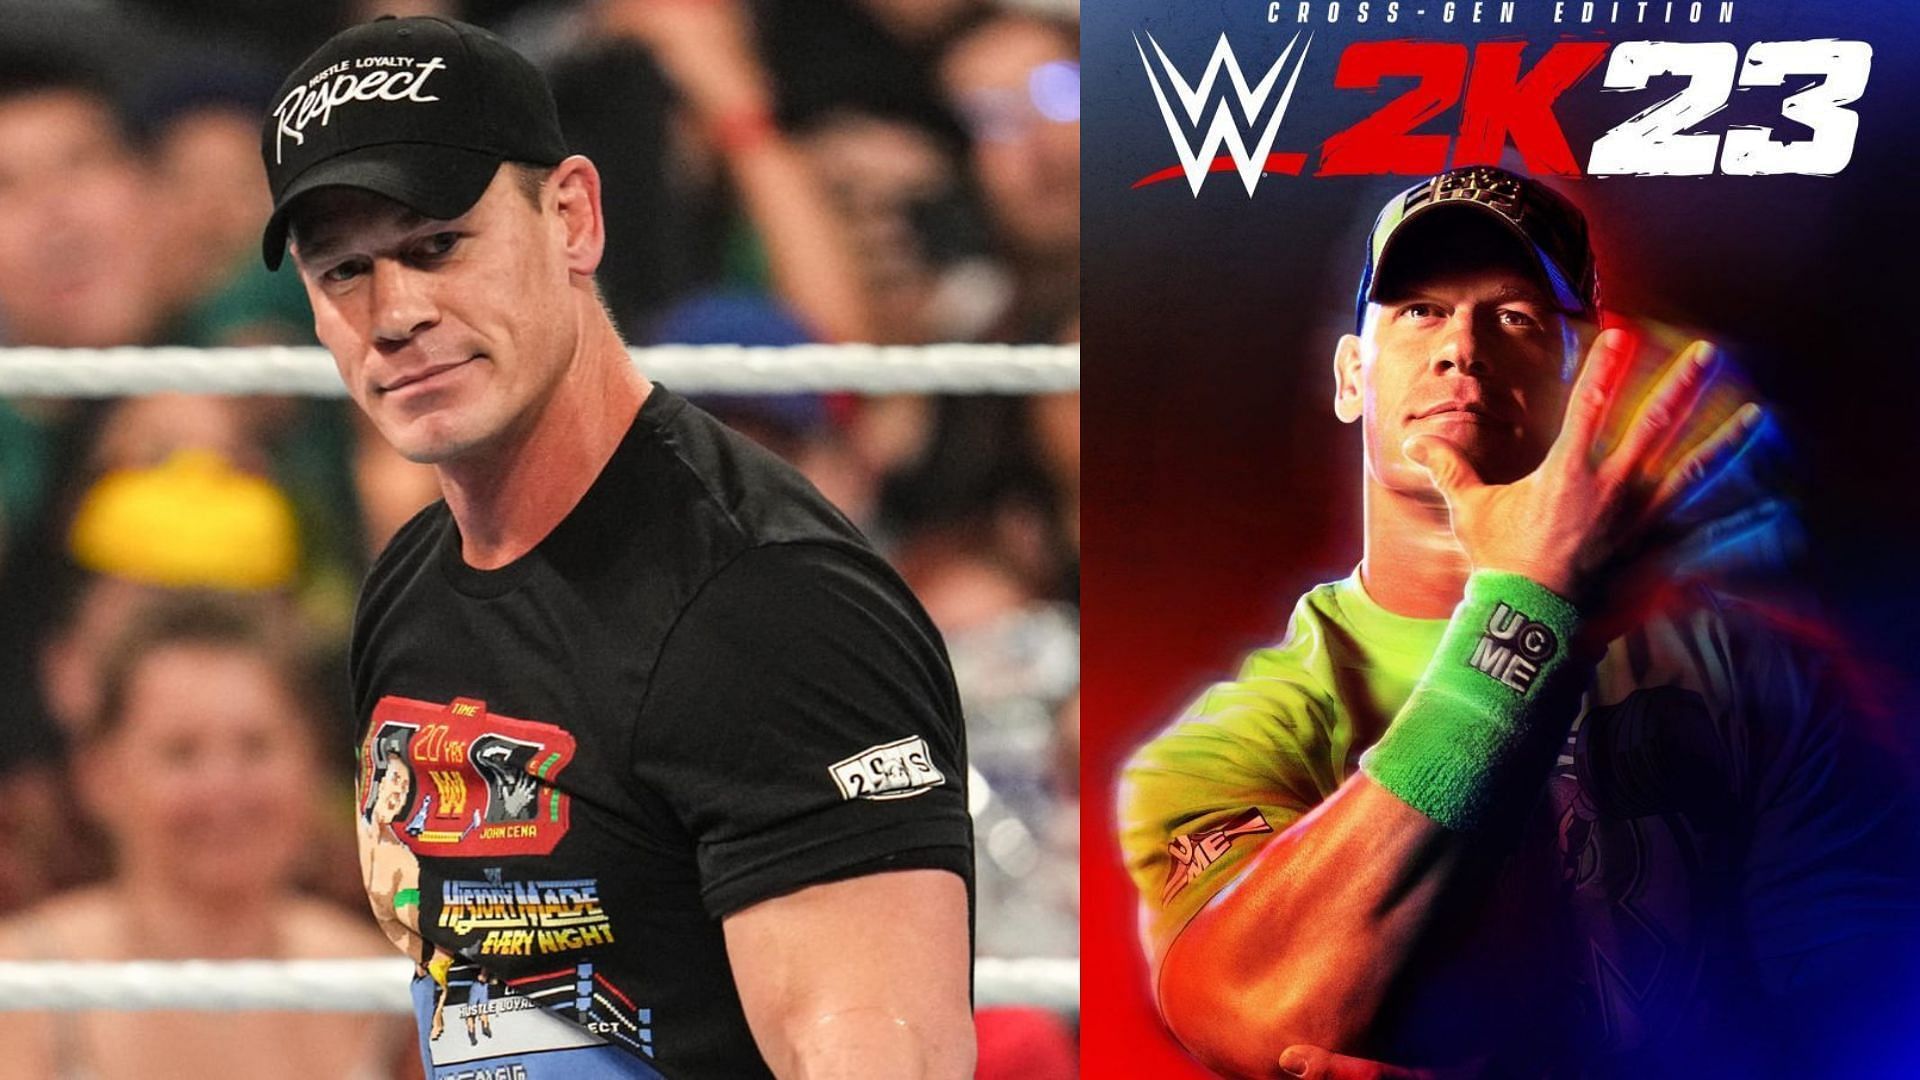 John Cena is the official cover Superstar of WWE 2K23